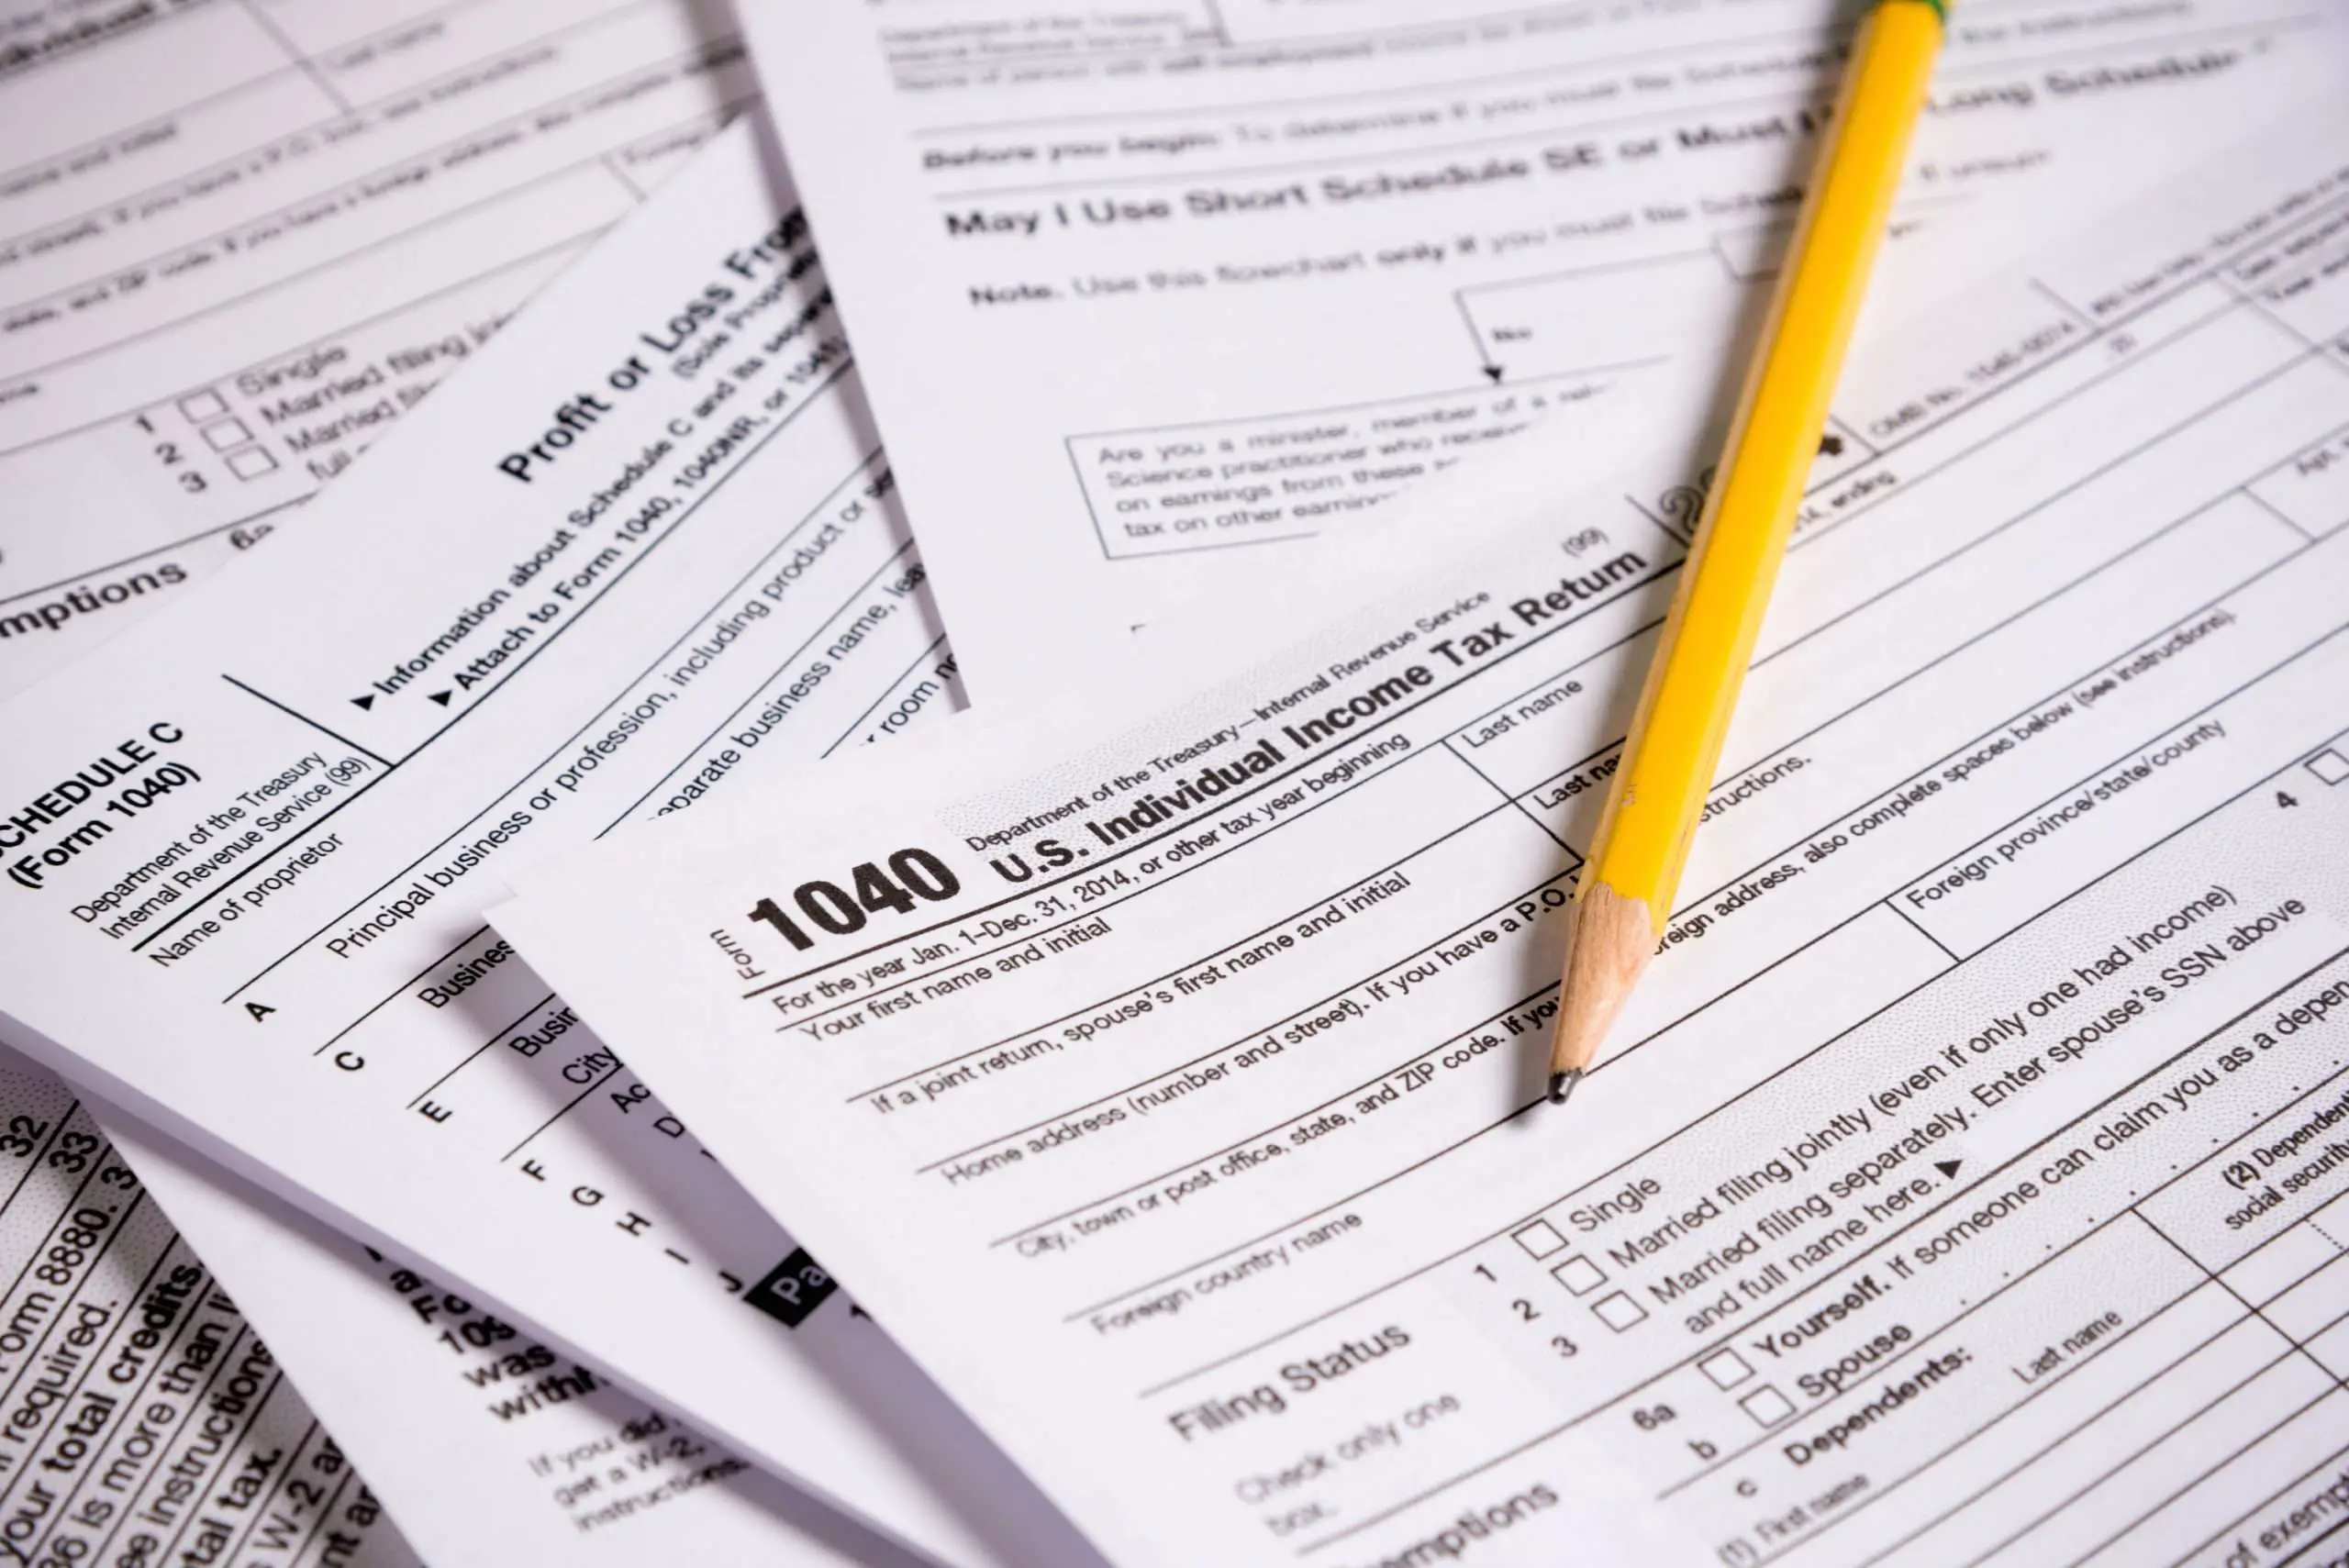 How Does the IRS Taxpayer Advocate Service Help Me?